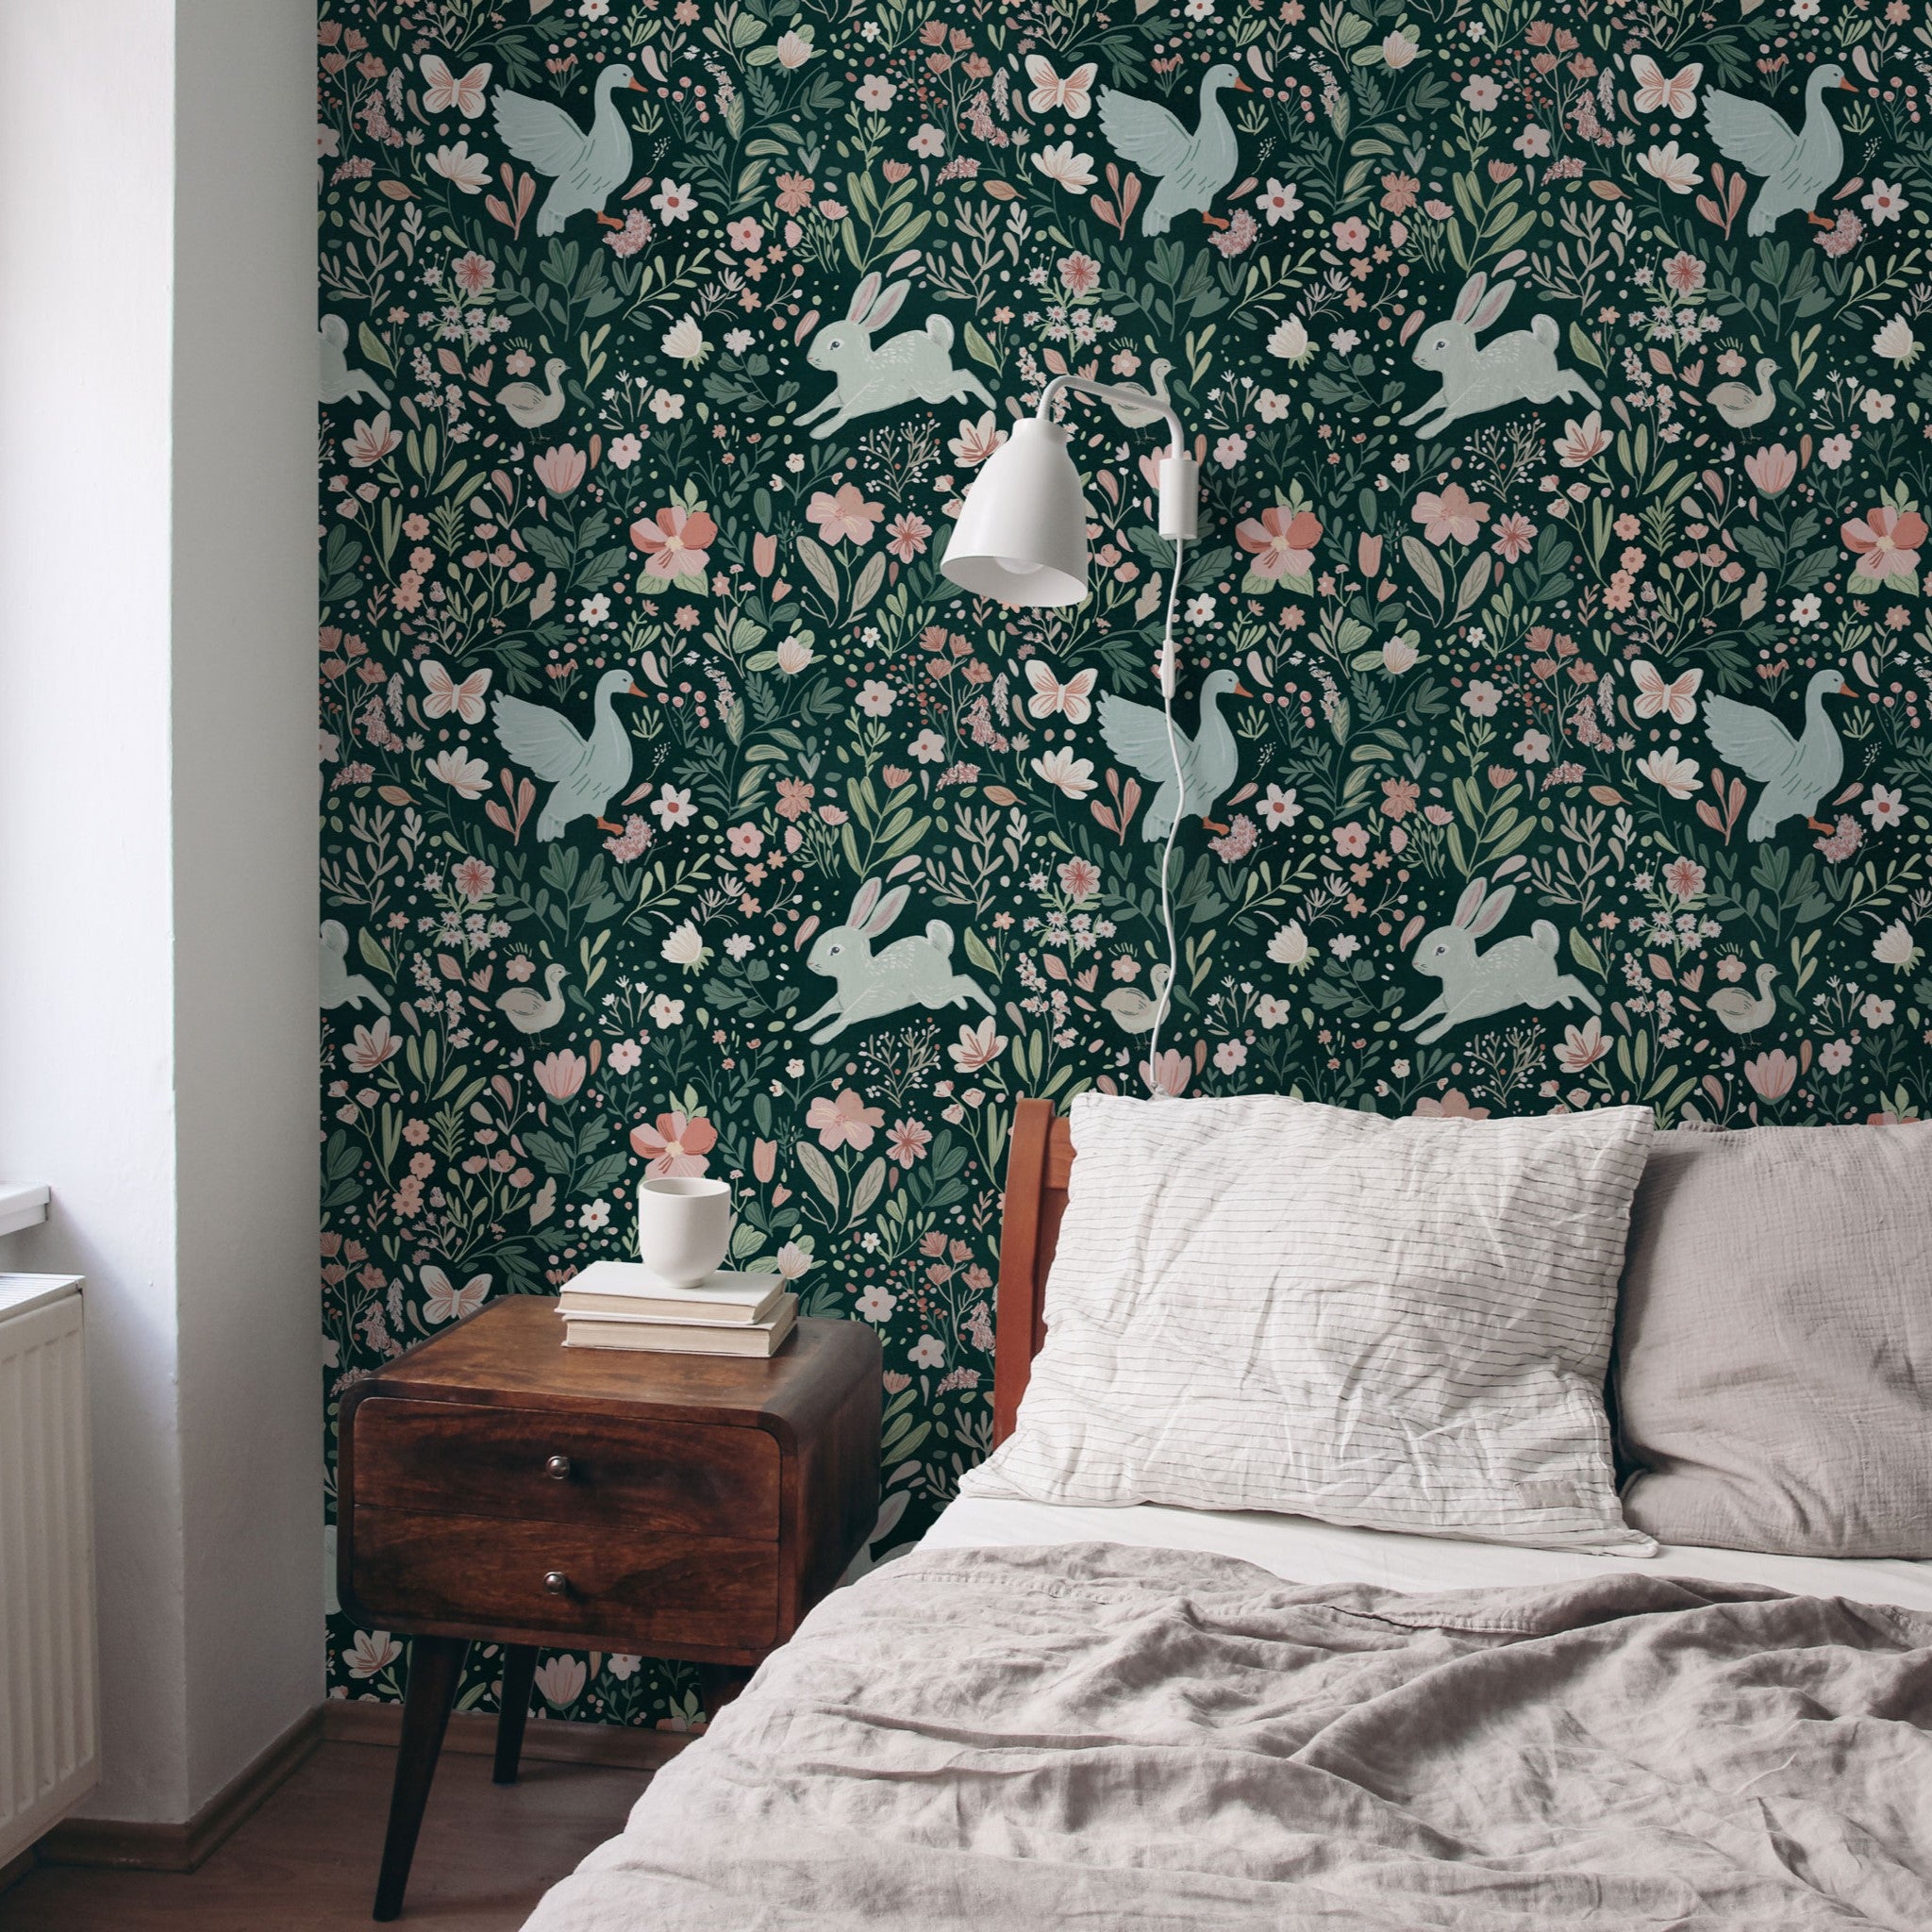 "Wall Blush Wildwood Friends Wallpaper adorning a cozy bedroom, showcasing design focus in a home setting."